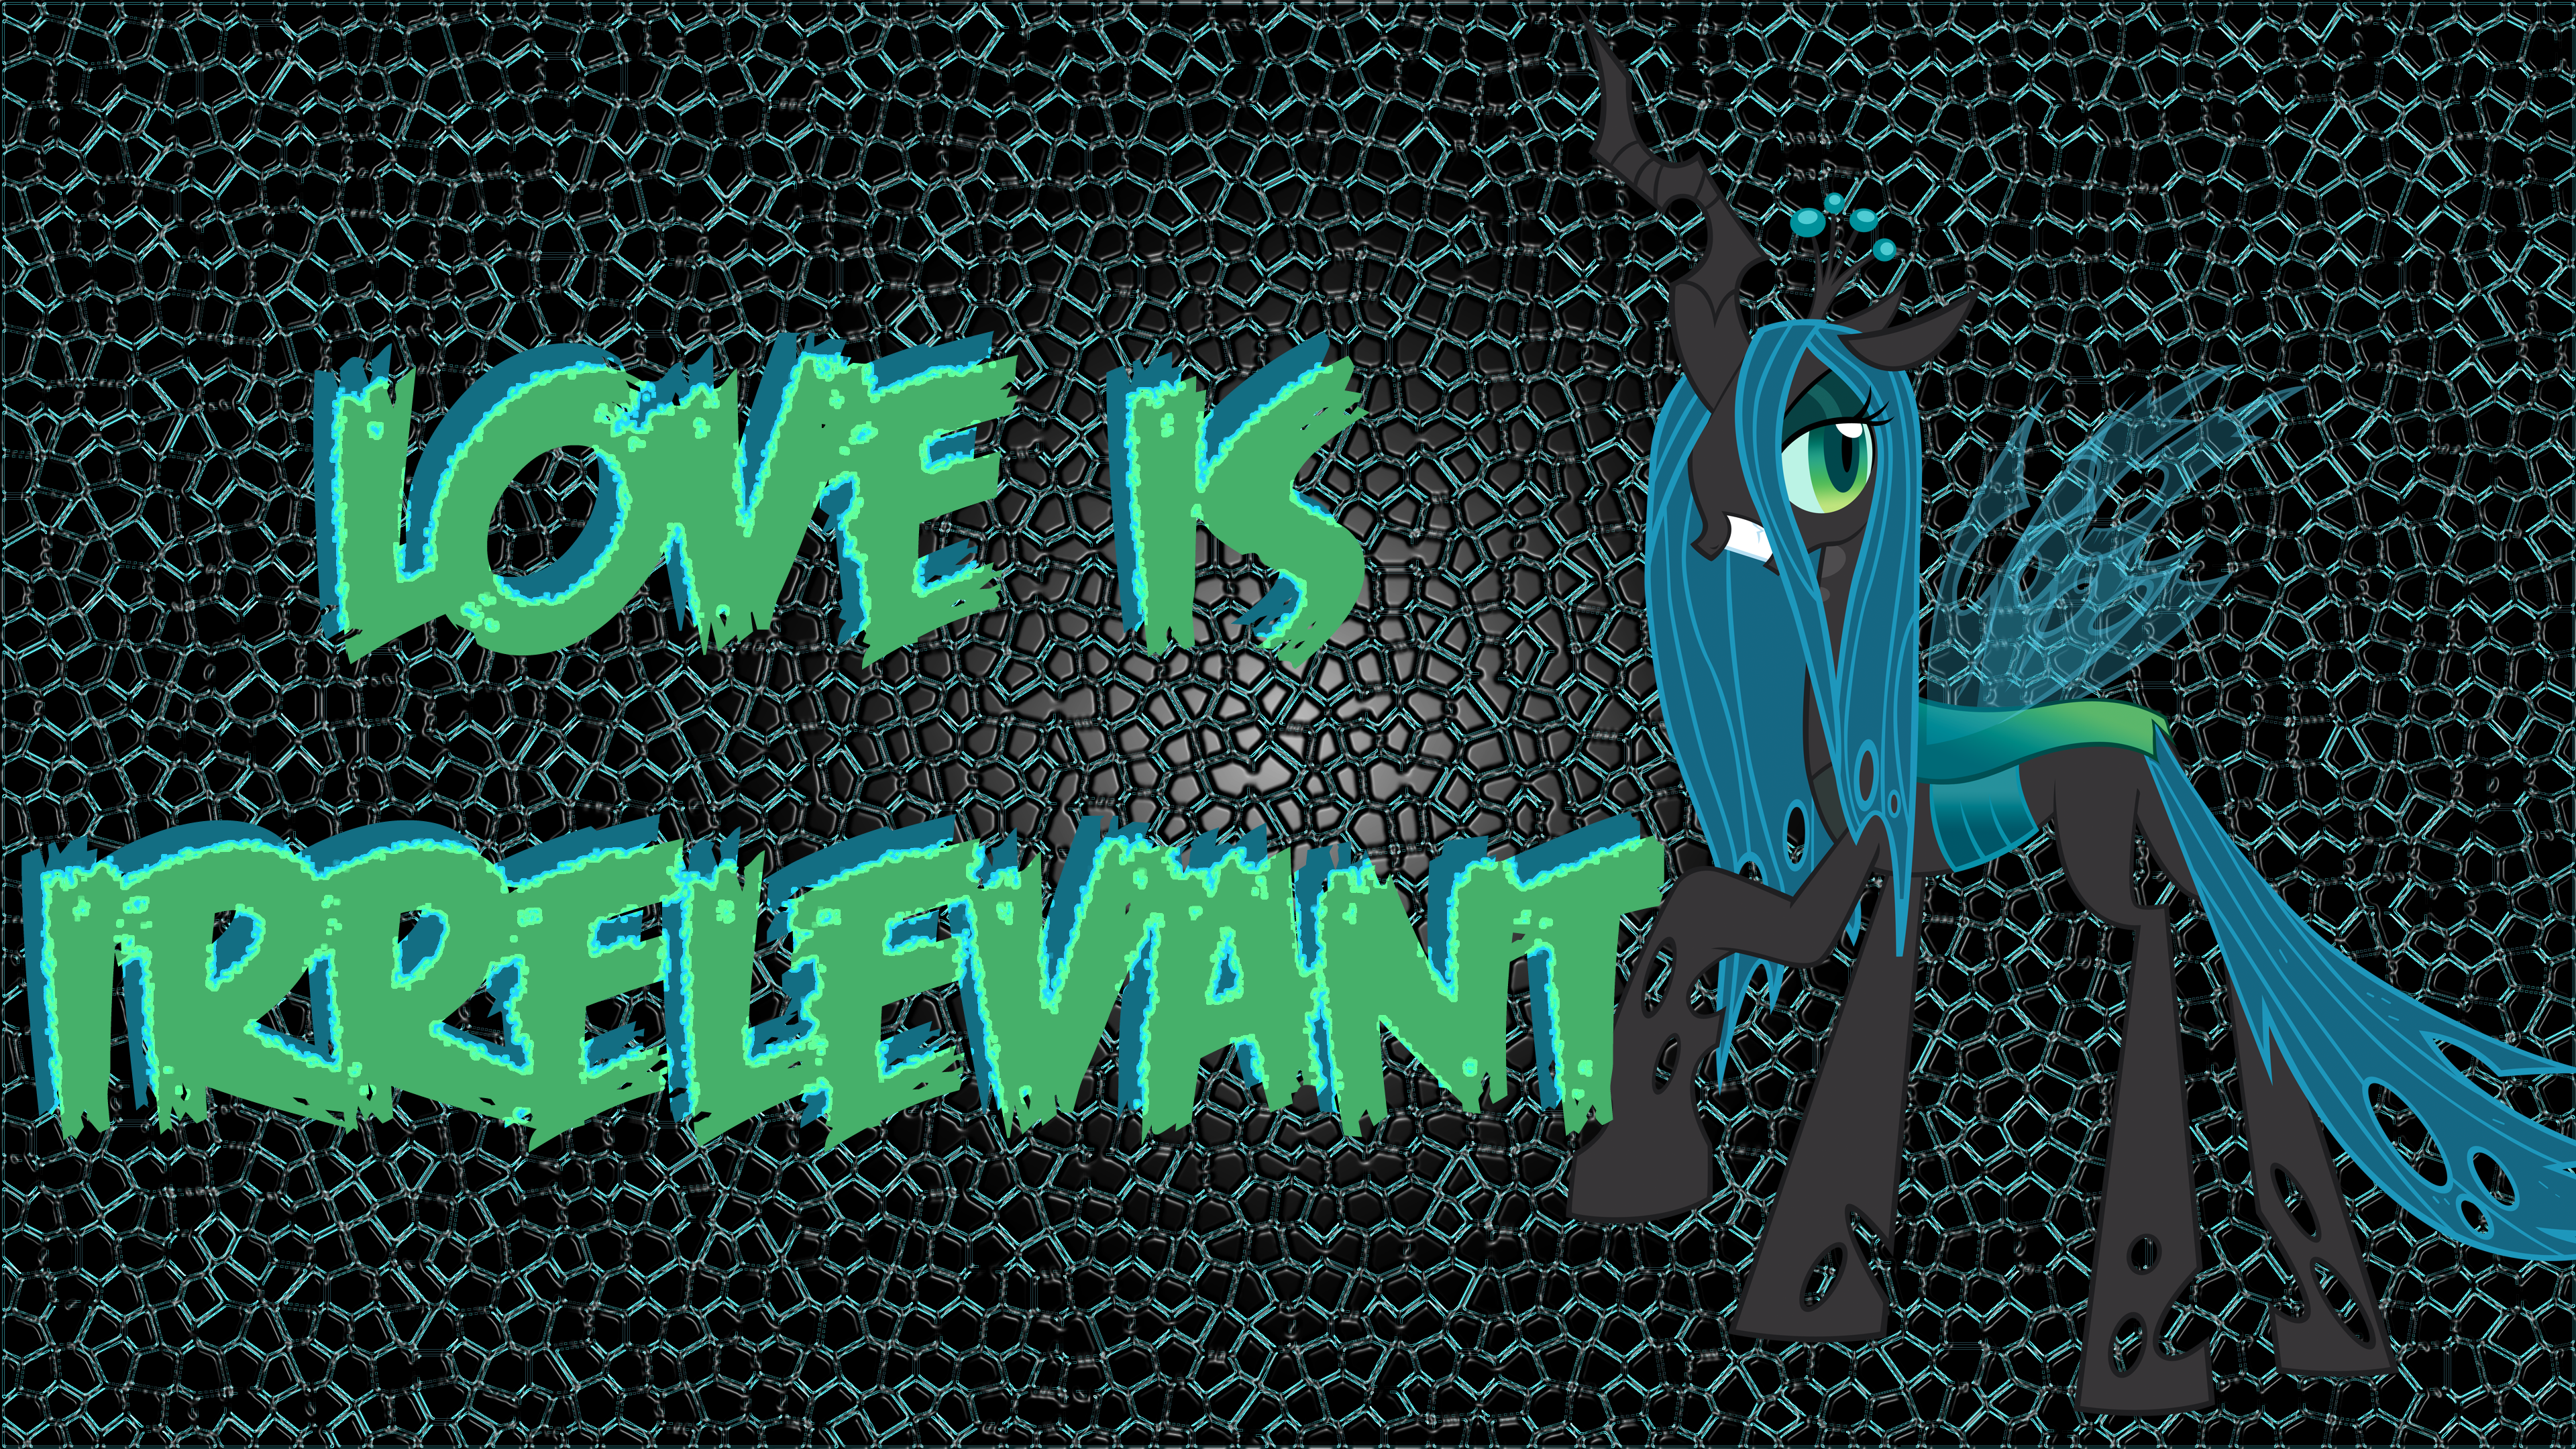 Love is Irrelevant by aleksa0rs1 and Blackm3sh